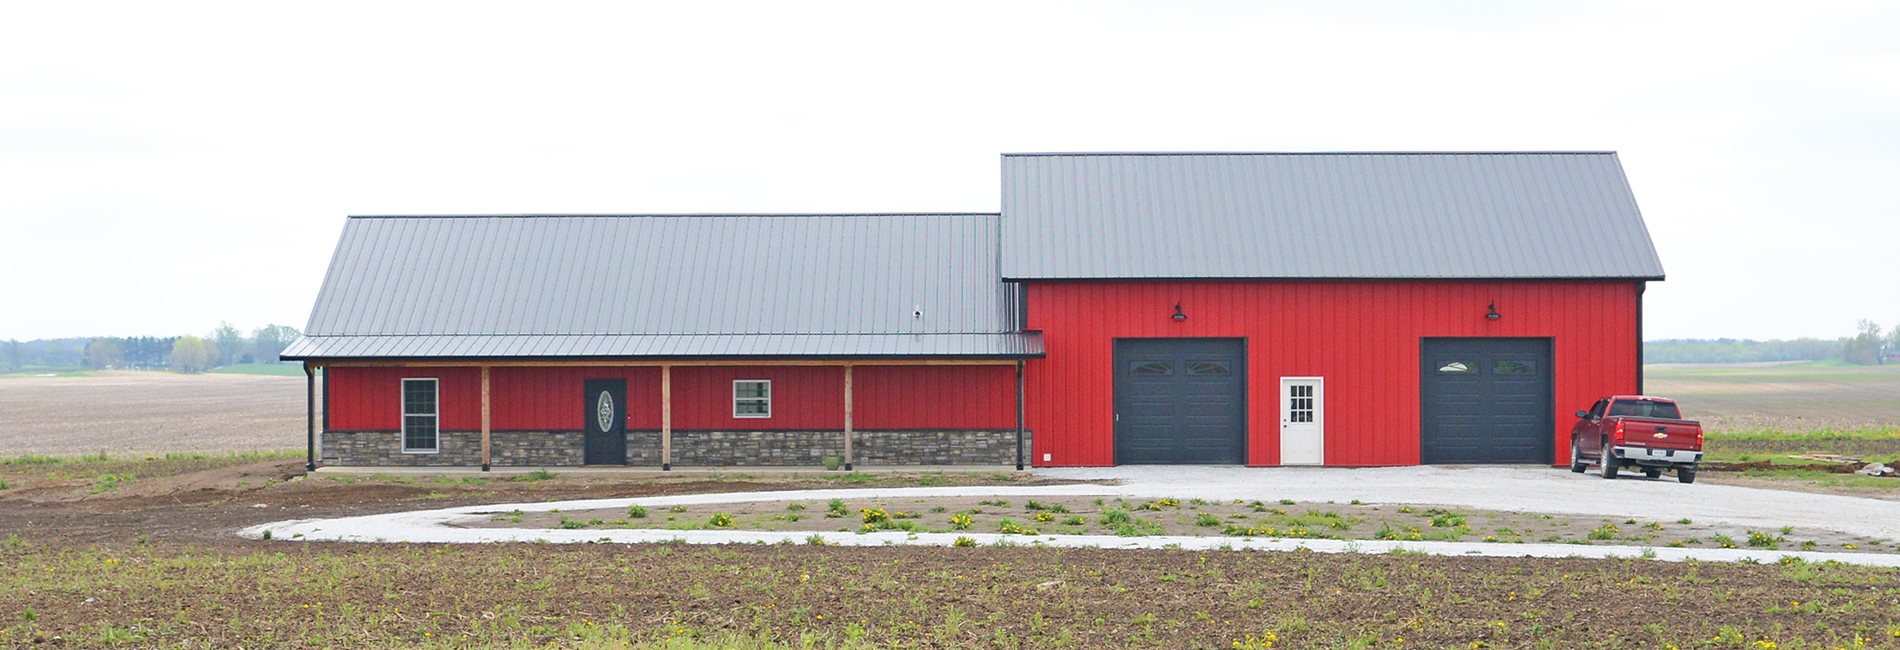 Pole barn residential home additions, Garages and Sheds. Build a Shouse or barndominium.